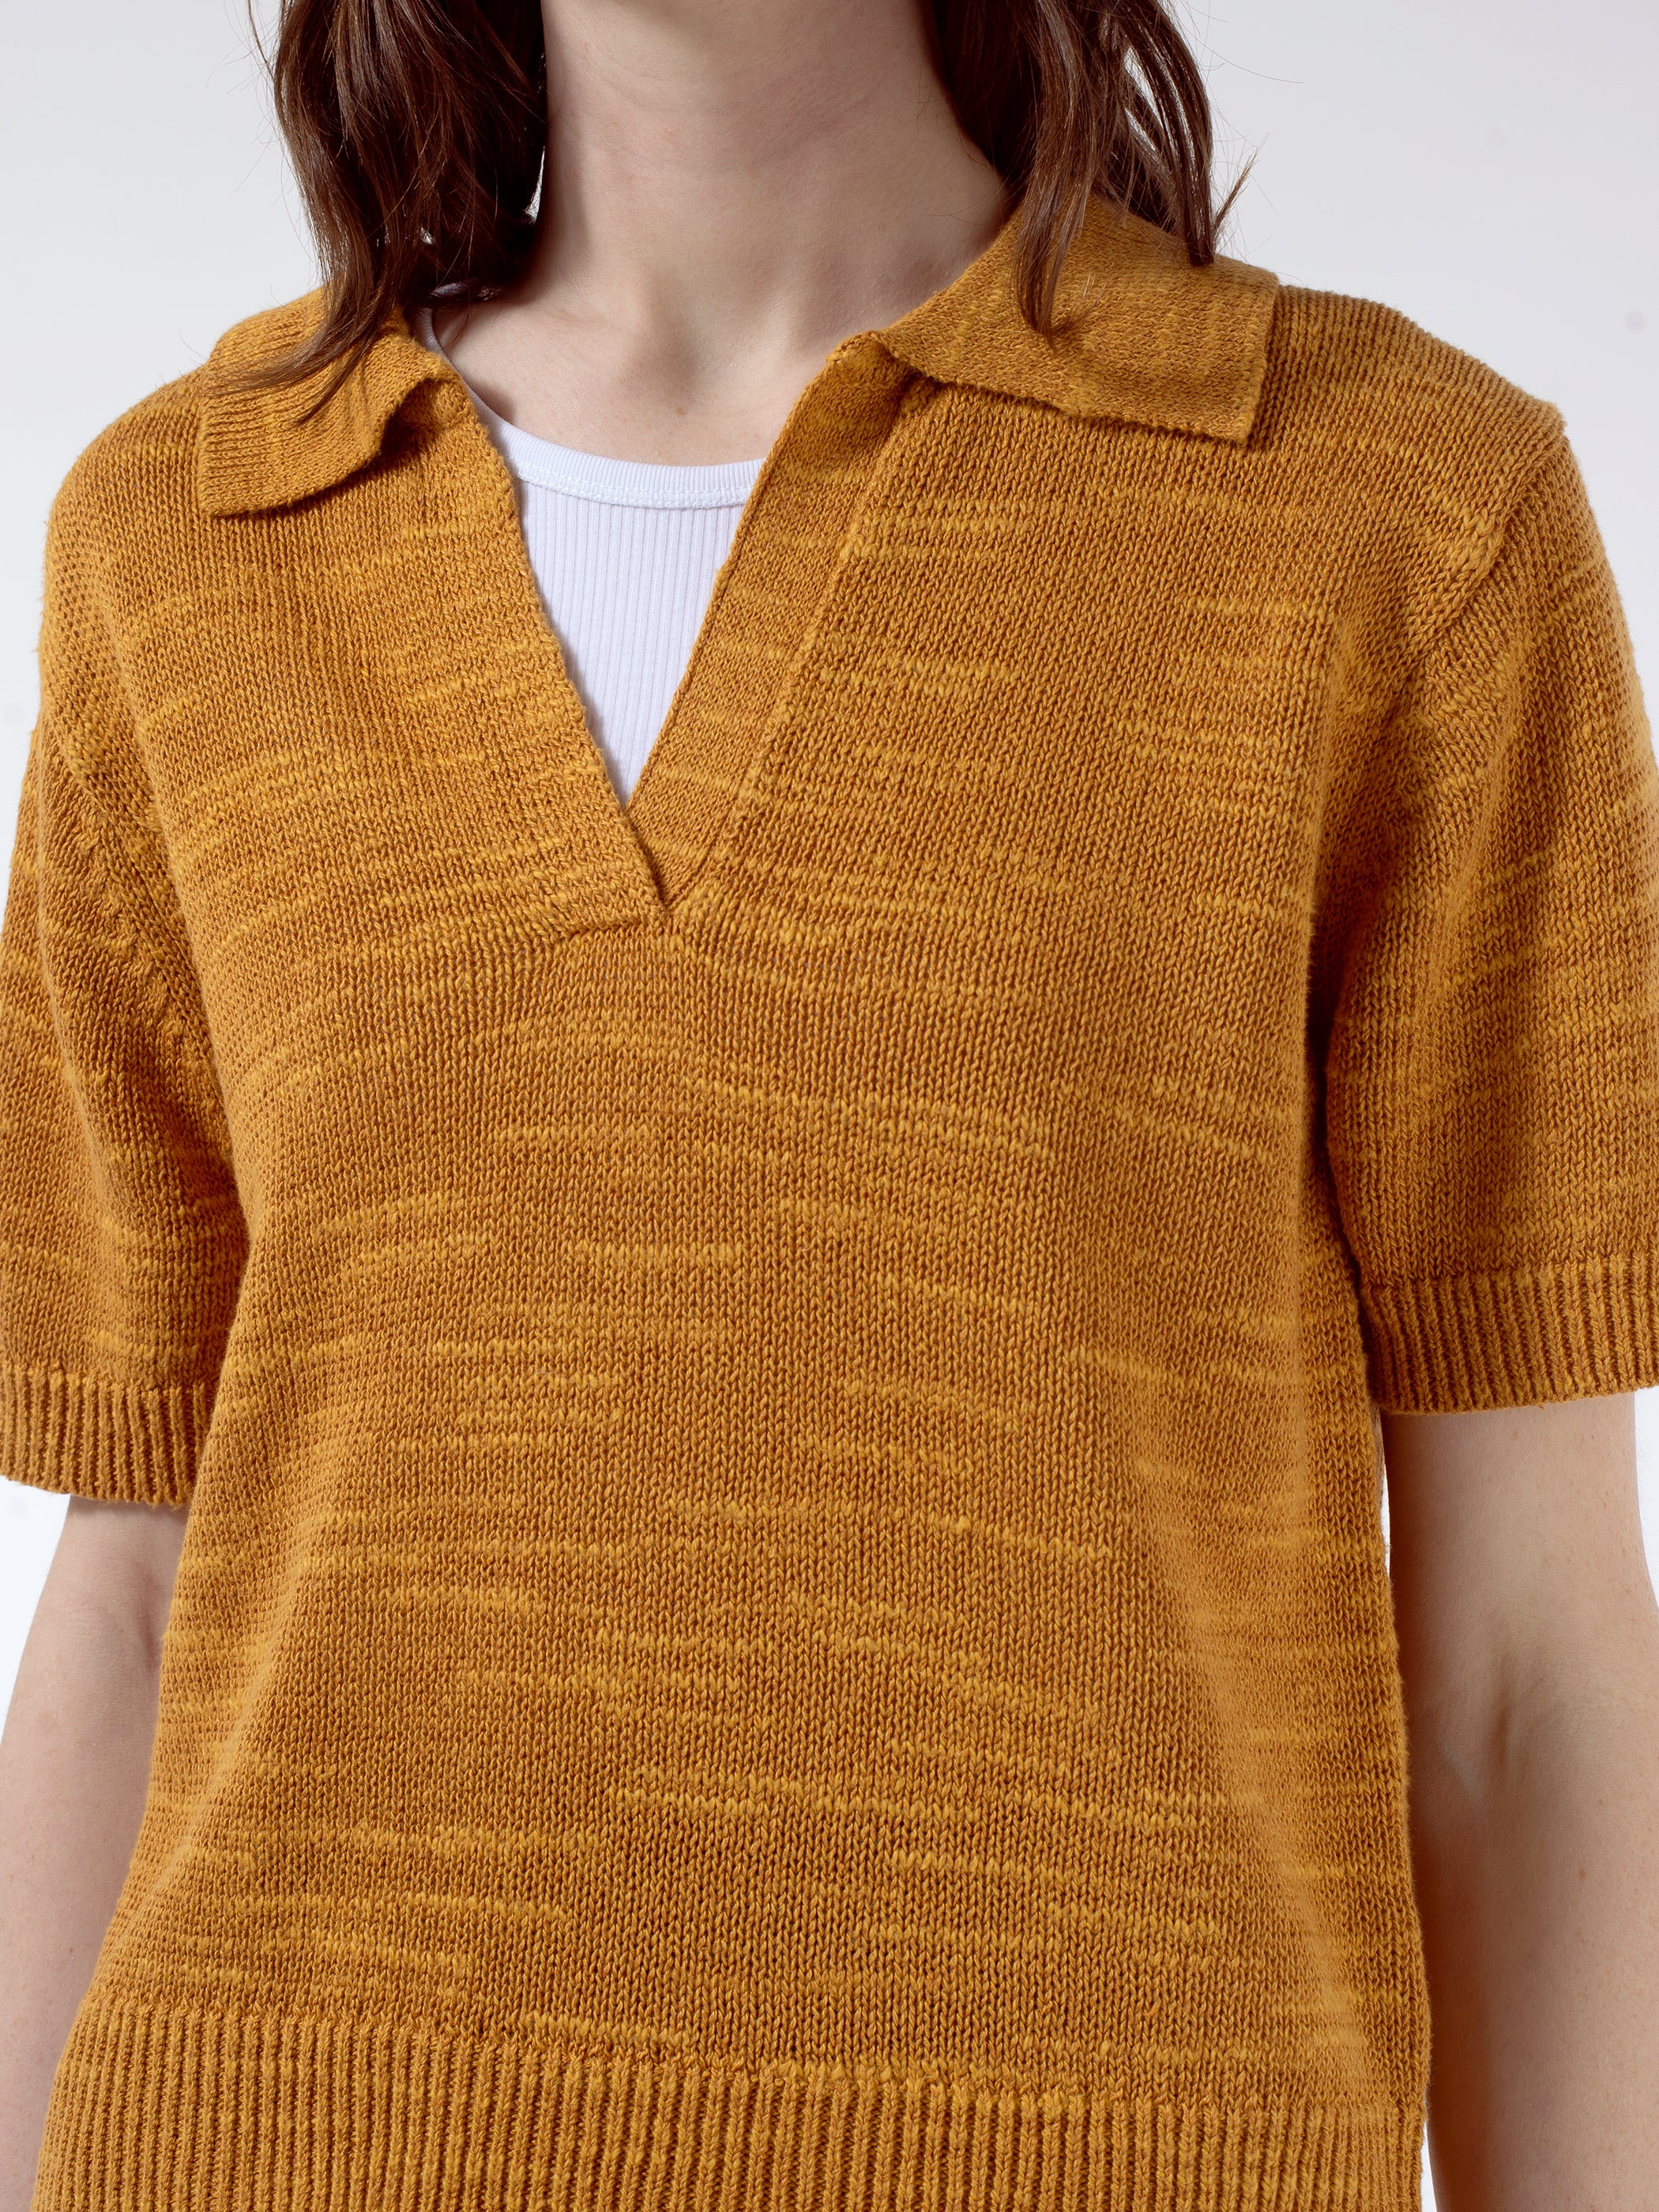 Cotton Linen Knitted Top